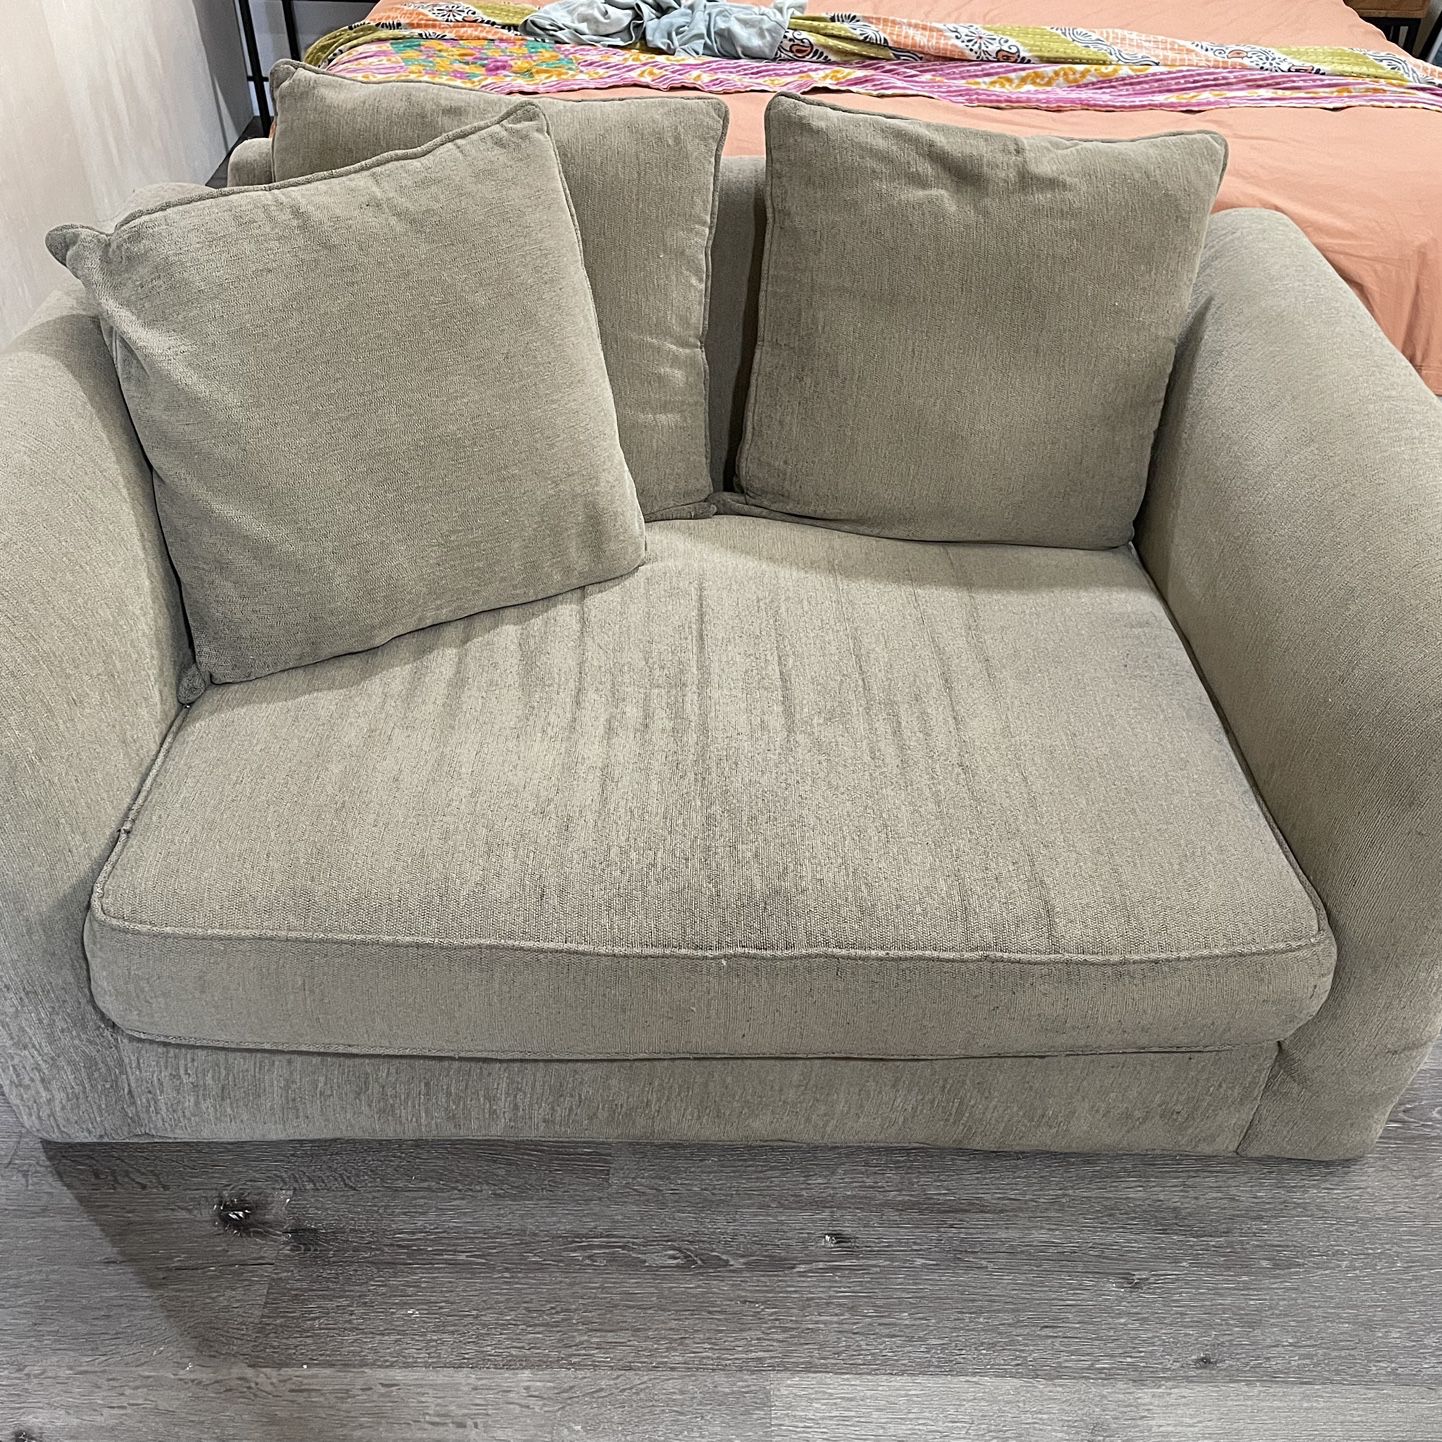 1 Loveseat And 1 Sofa Price For Both 